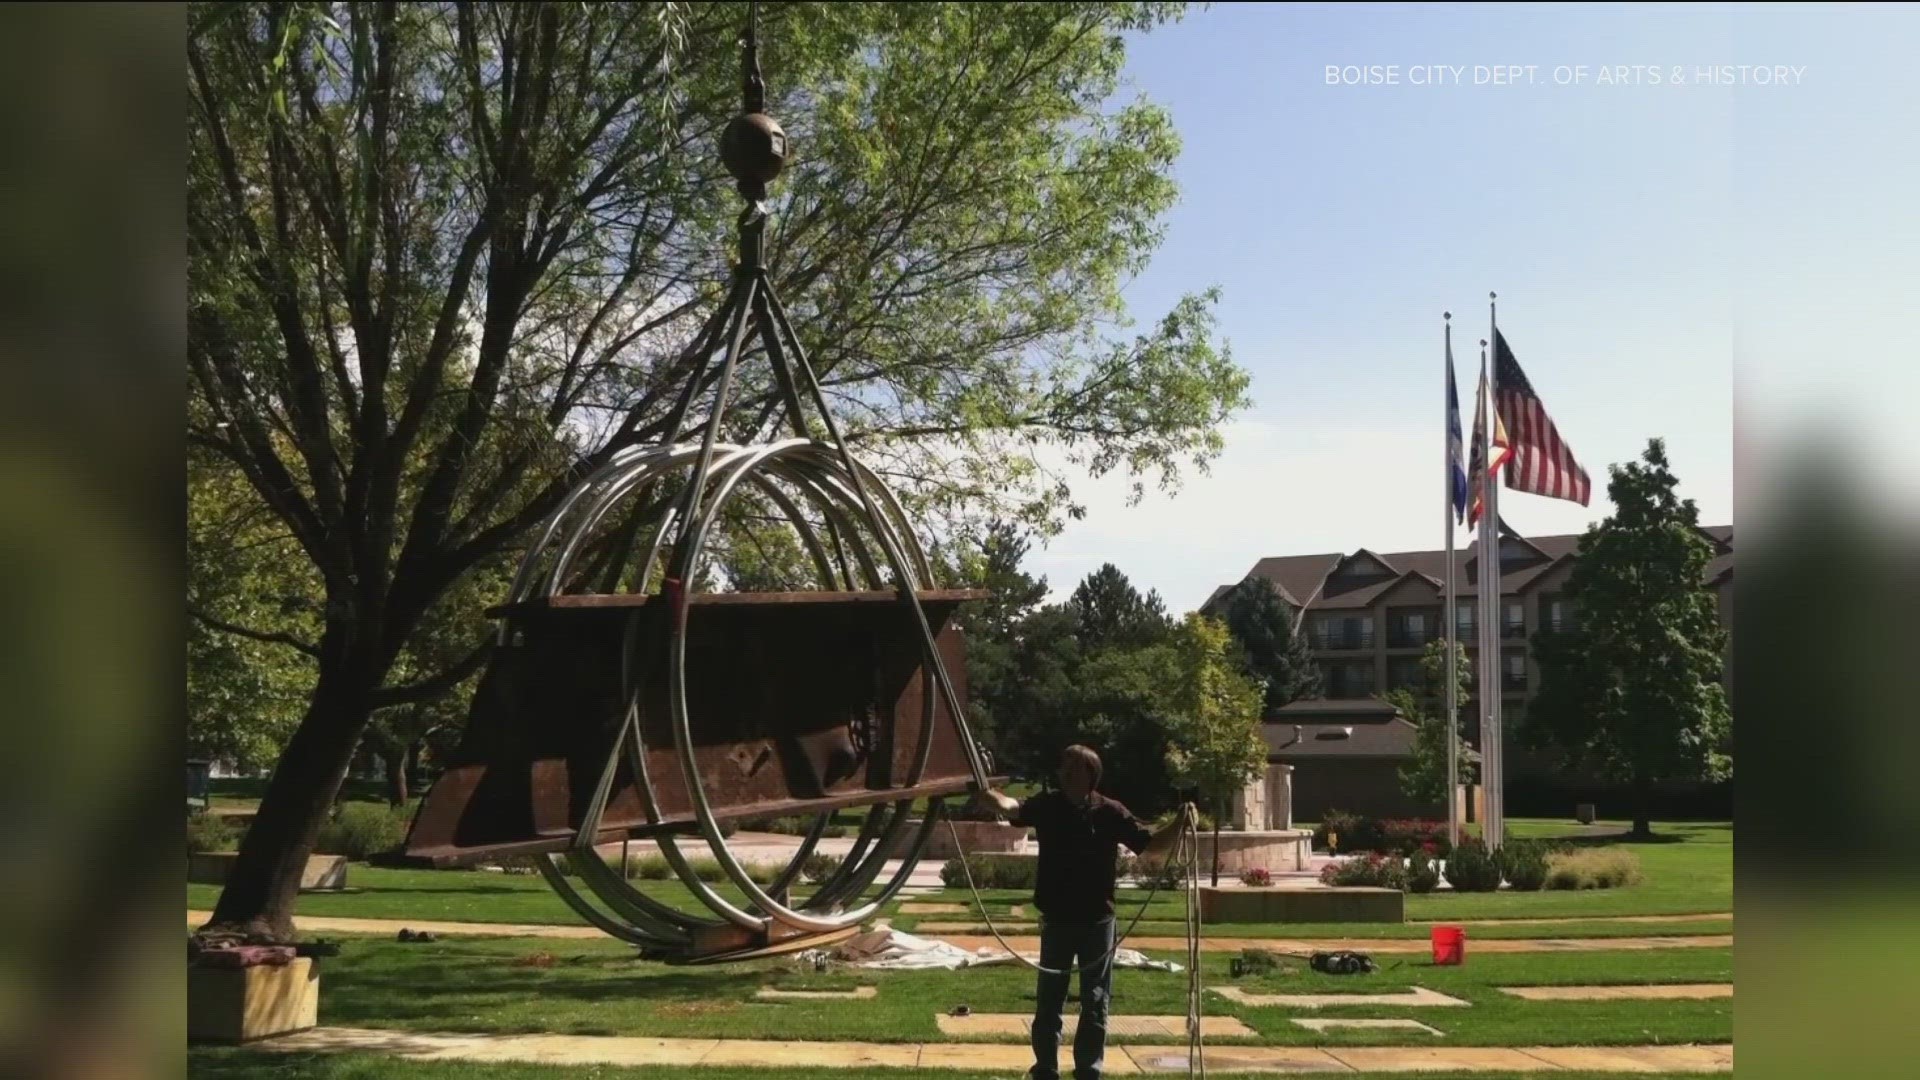 Did you know Idaho has a 9/11 memorial that incorporates a piece of the fallen World Trade Center? It's located at Idaho Fallen Firefighters Memorial Park in Boise.